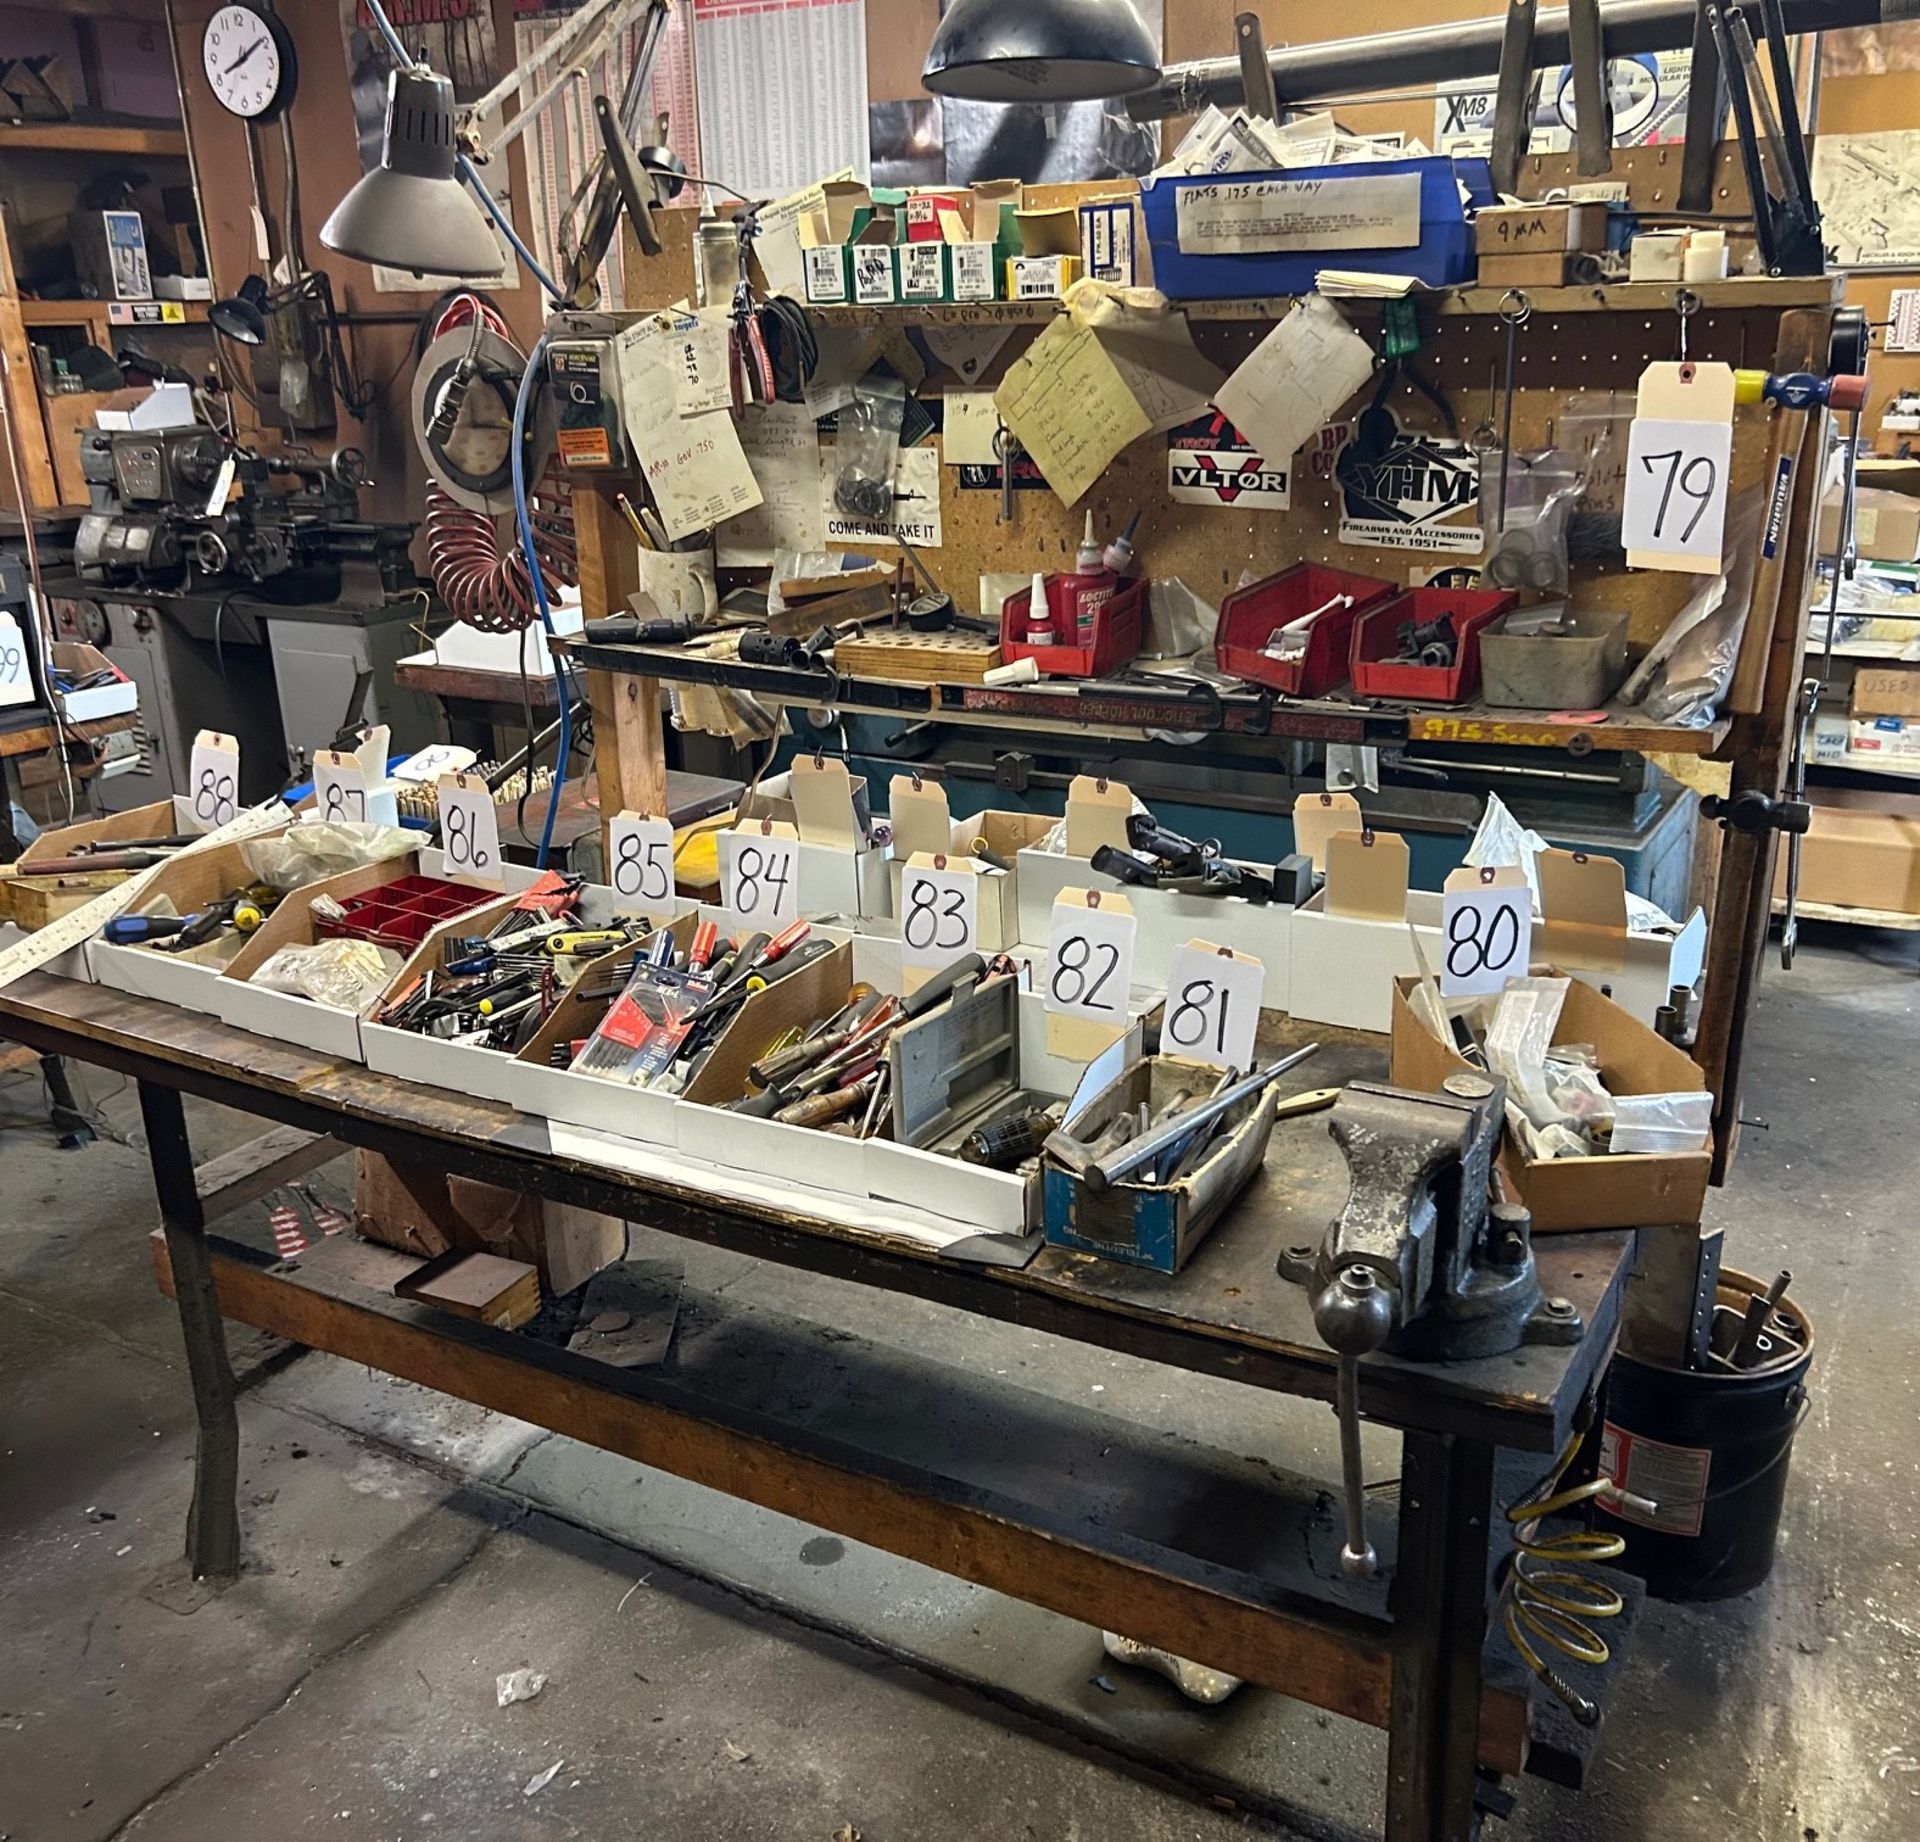 Table w/ Vise & Air Line Hook-ups & Contents of Upper Peg Board